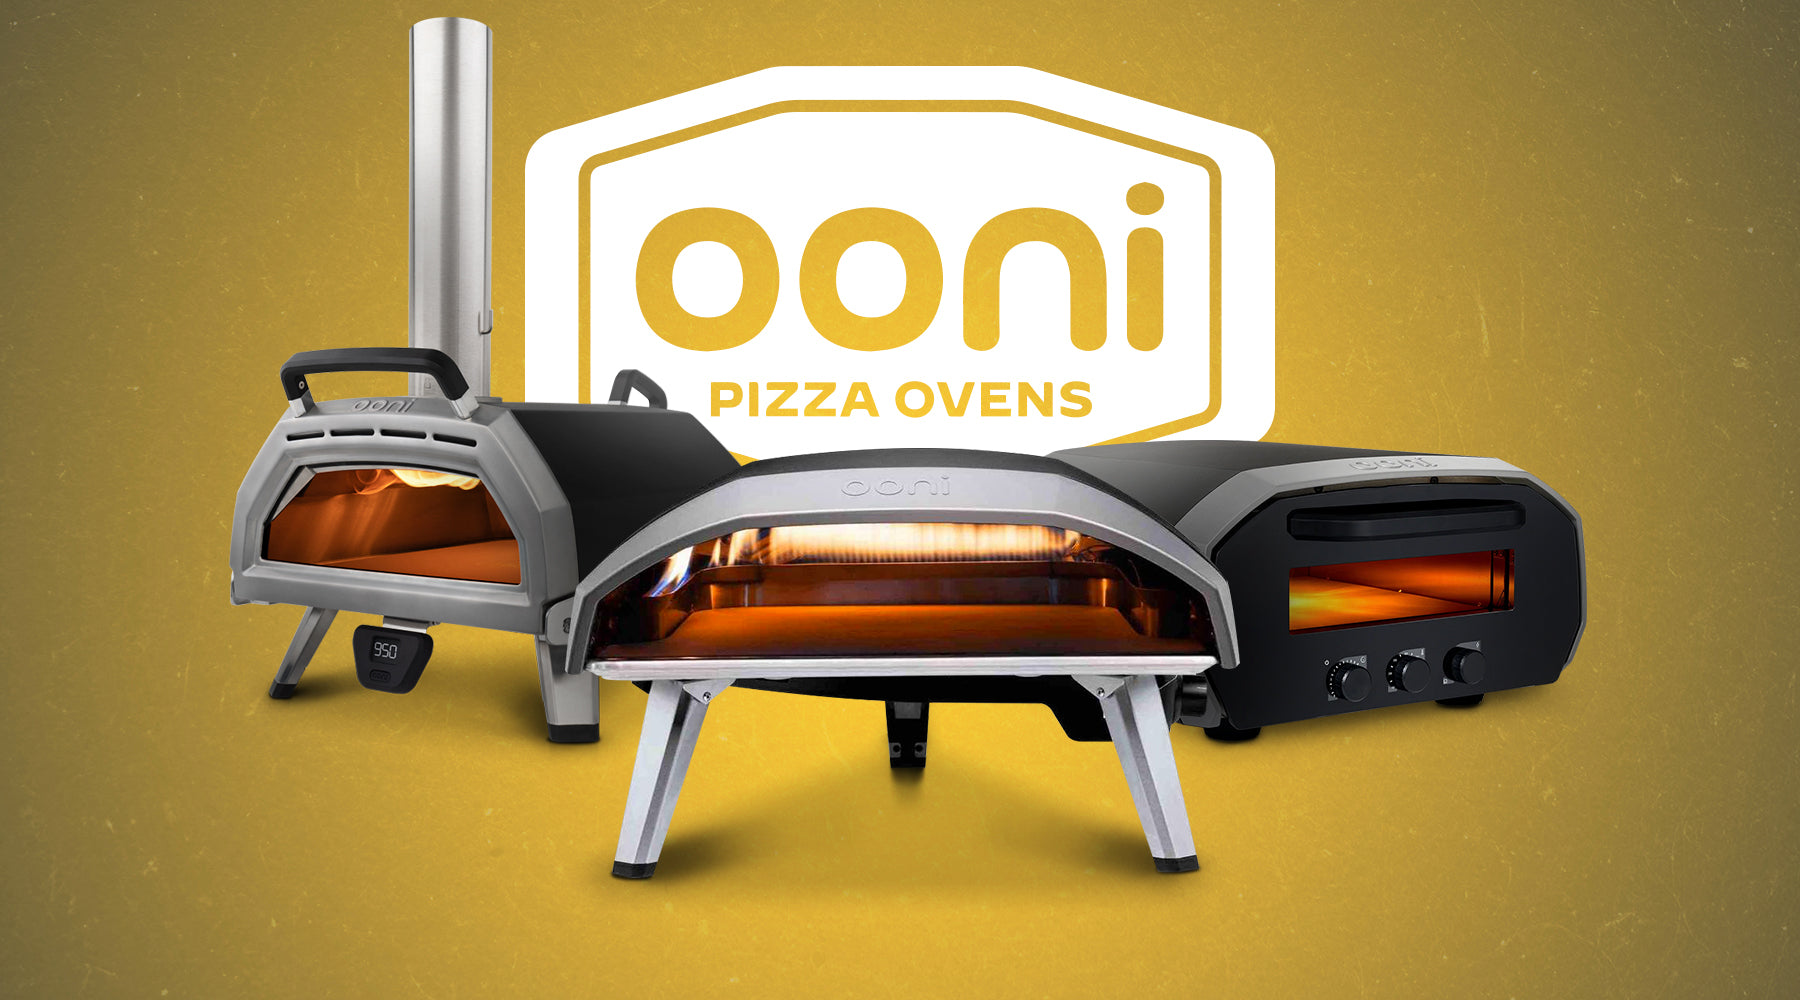 Discover the ooni Tabletop Pizza Oven at Joes BBQs